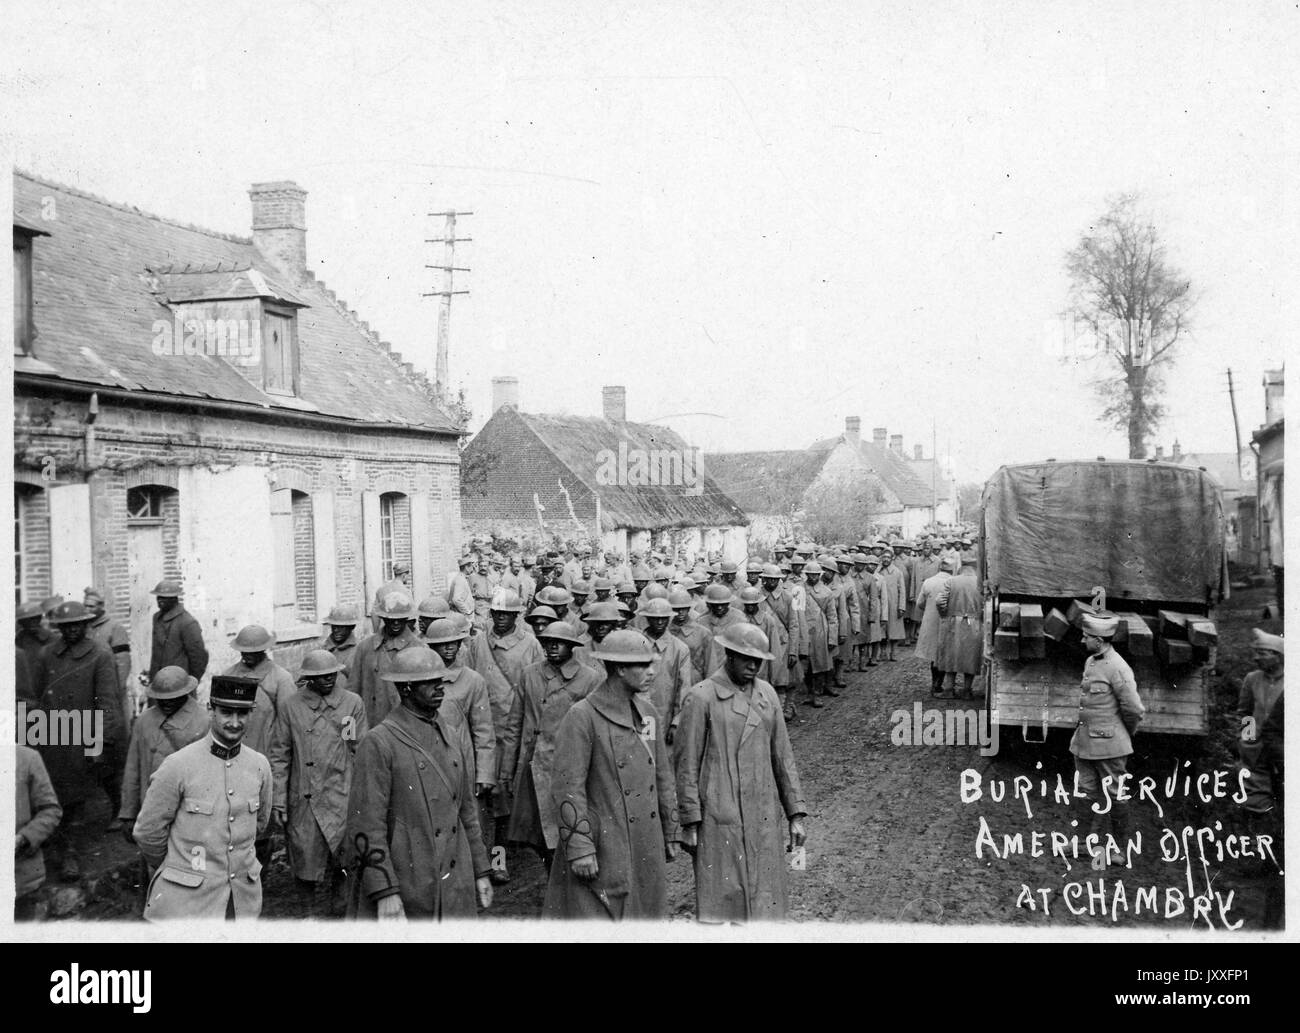 WWI Burial services of American officer at Chambry, large group of African American soldiers in uniforms and hats organized outside for burial service, full portrait, landscape shot, 1917. Stock Photo